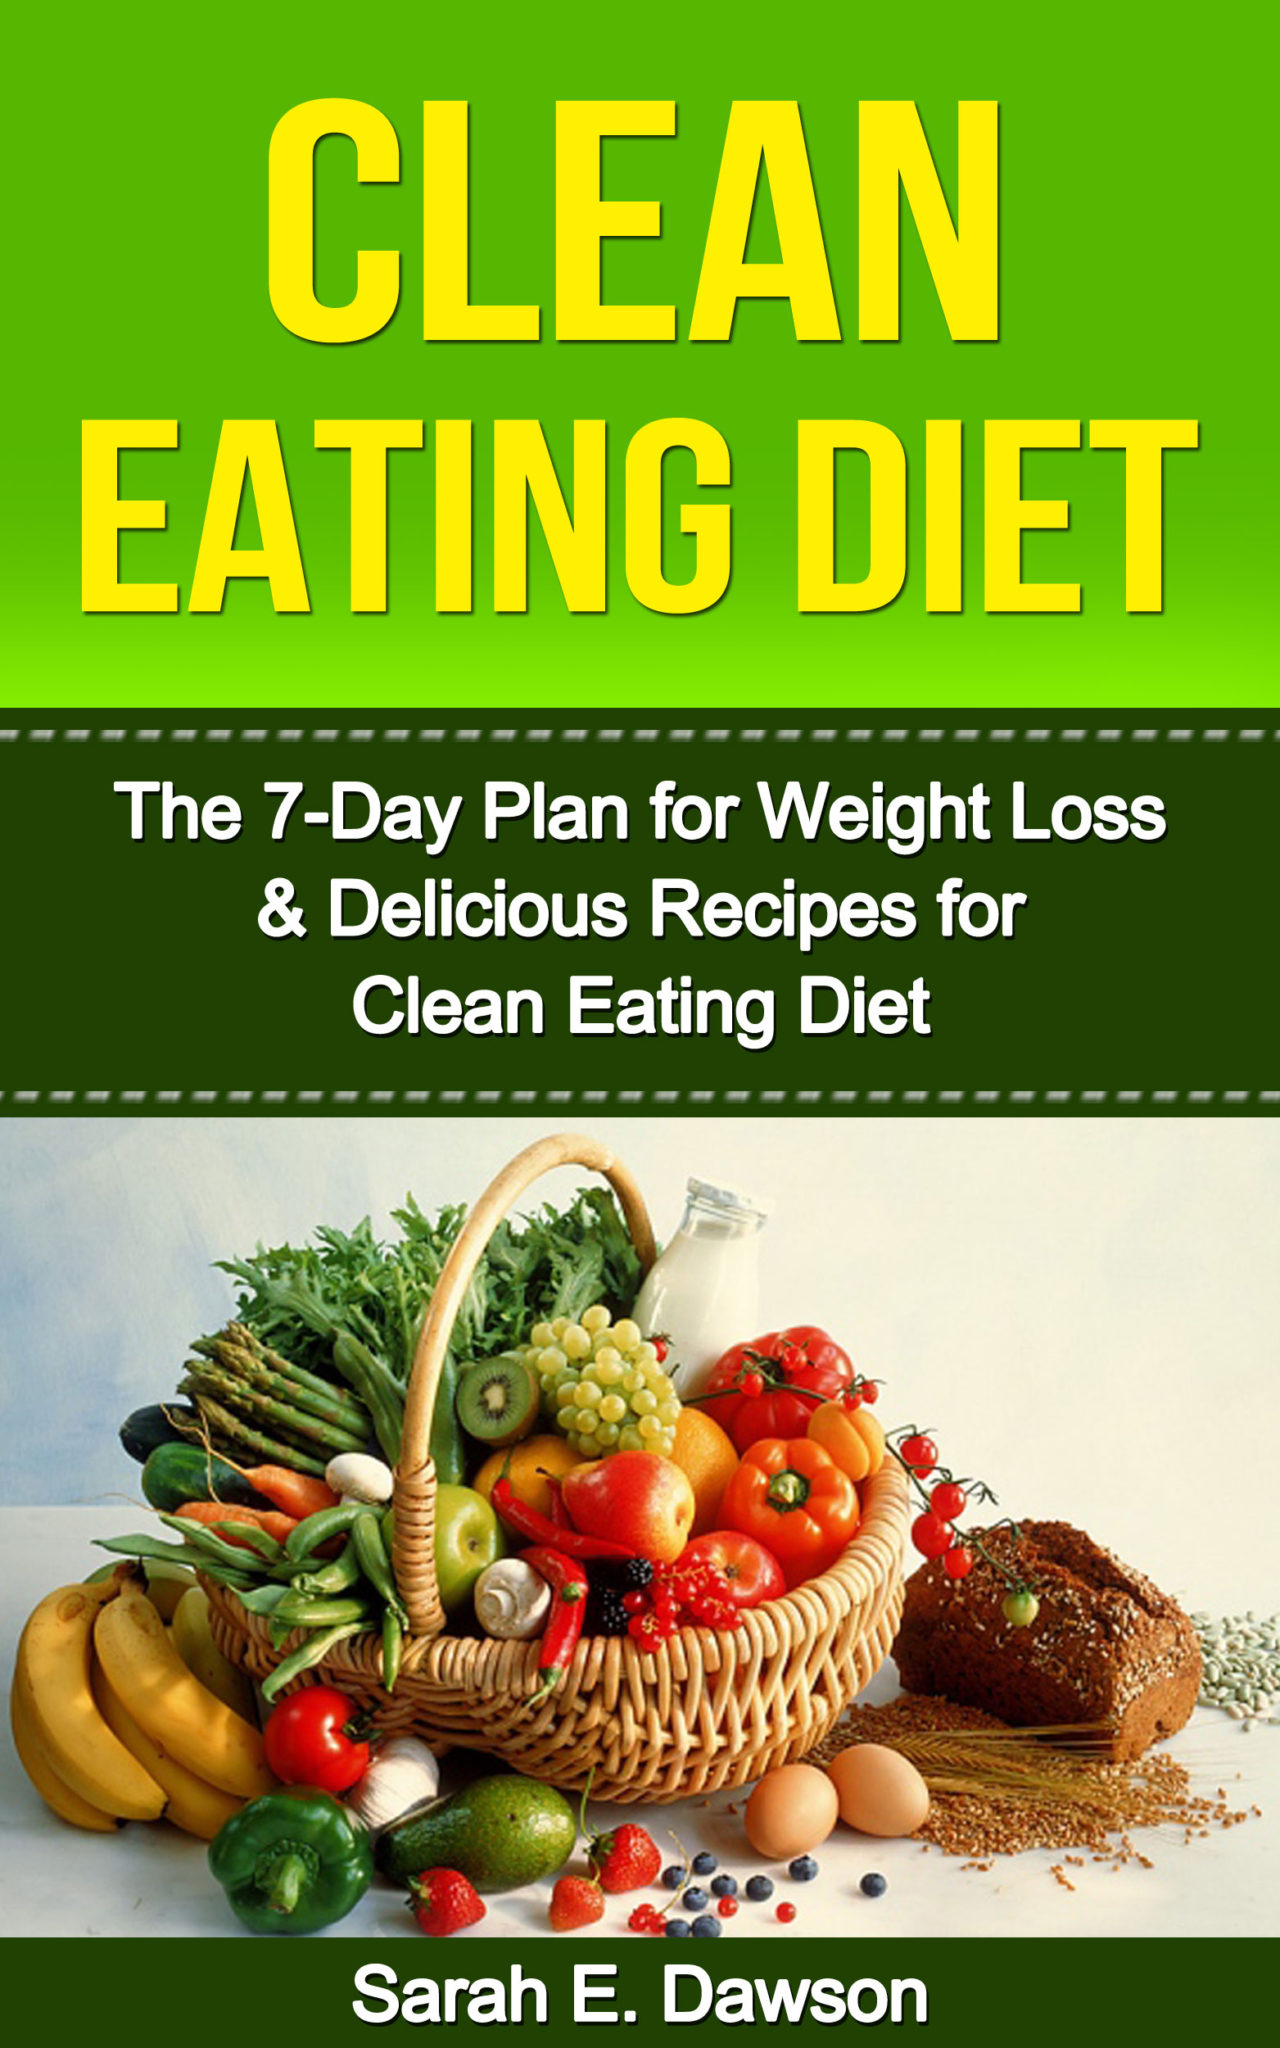 FREE: Clean Eating Diet: The 7-Day Plan for Weight Loss & Delicious Recipes for Clean Eating Diet by Sarah E. Dawson